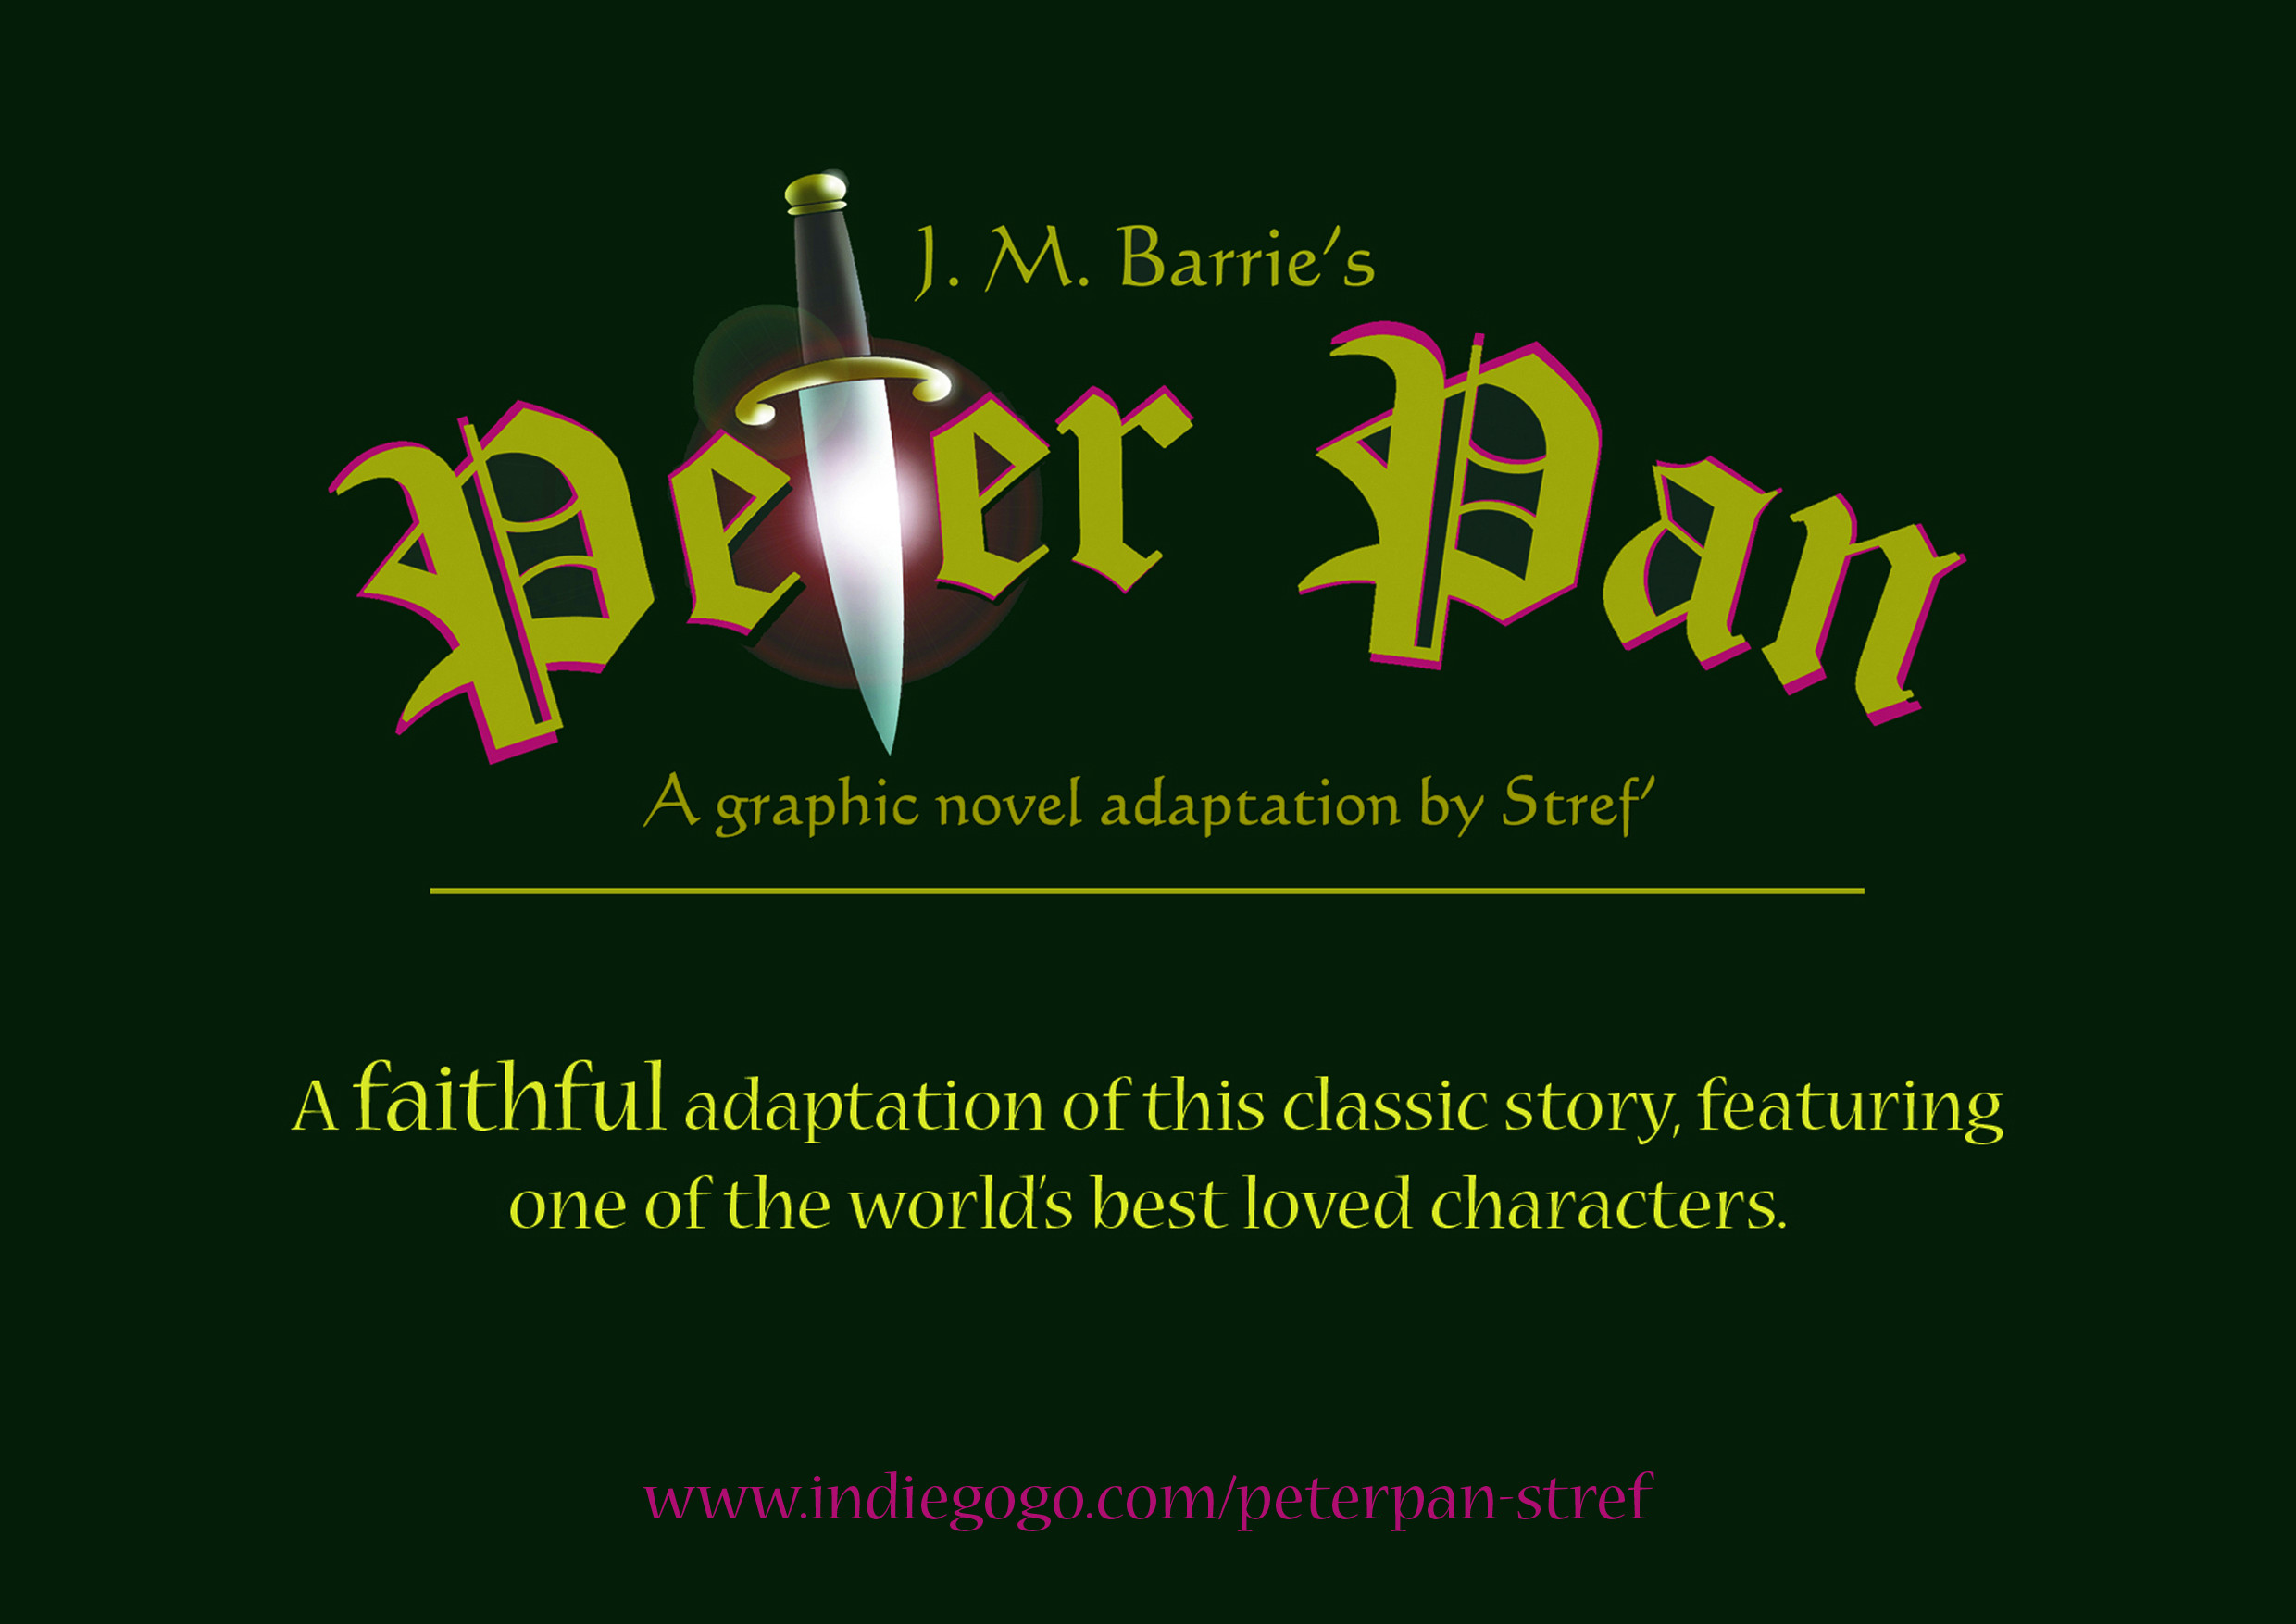 2480x1754 Peter Pan images LOGO HD wallpaper and background photos